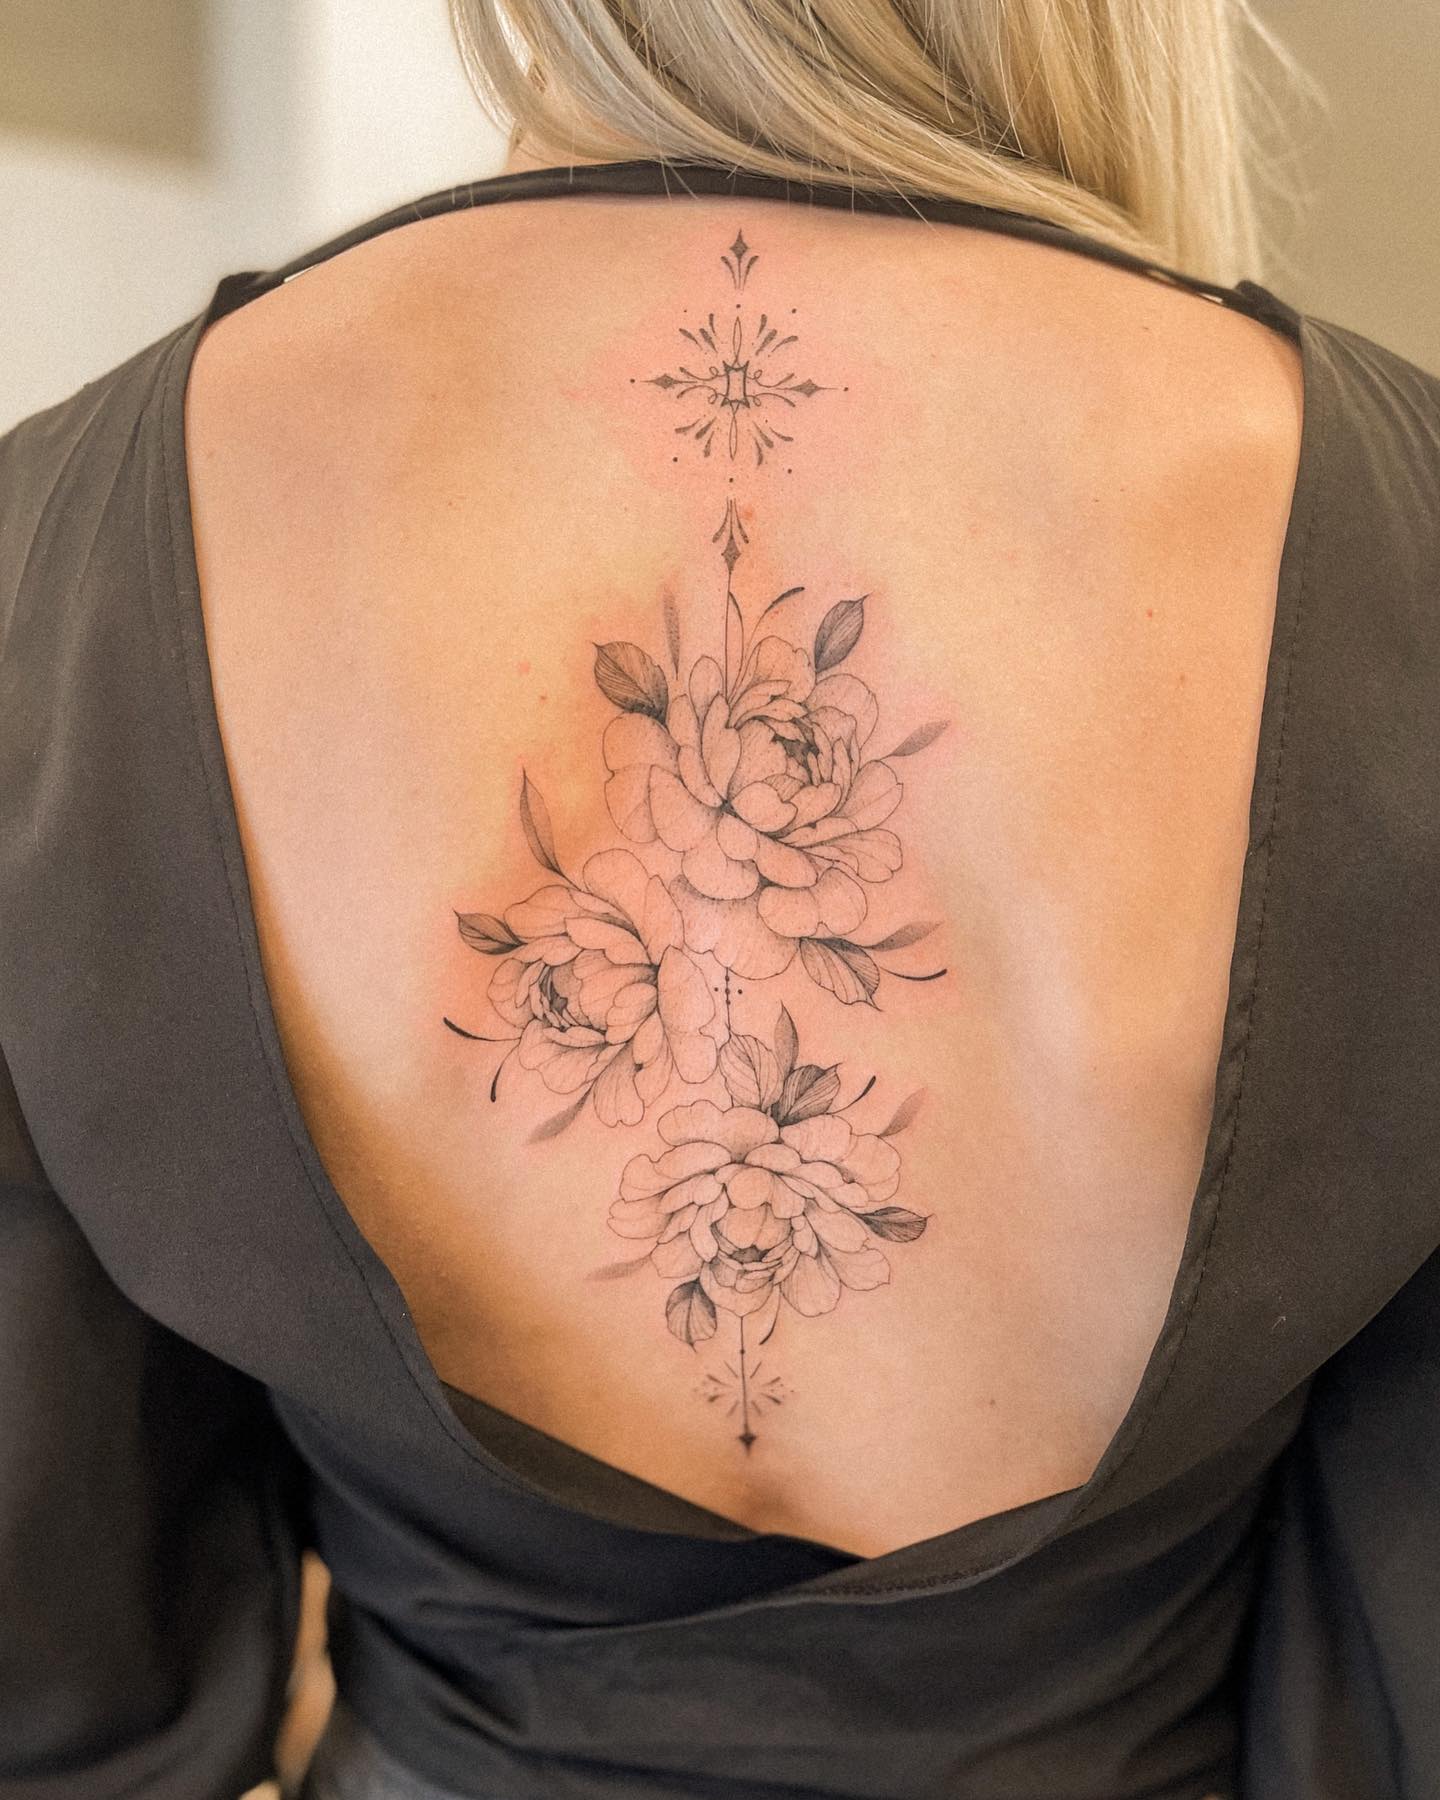 Back Tattoos for Women: 30+ Sexy Design Ideas to Try in 2023